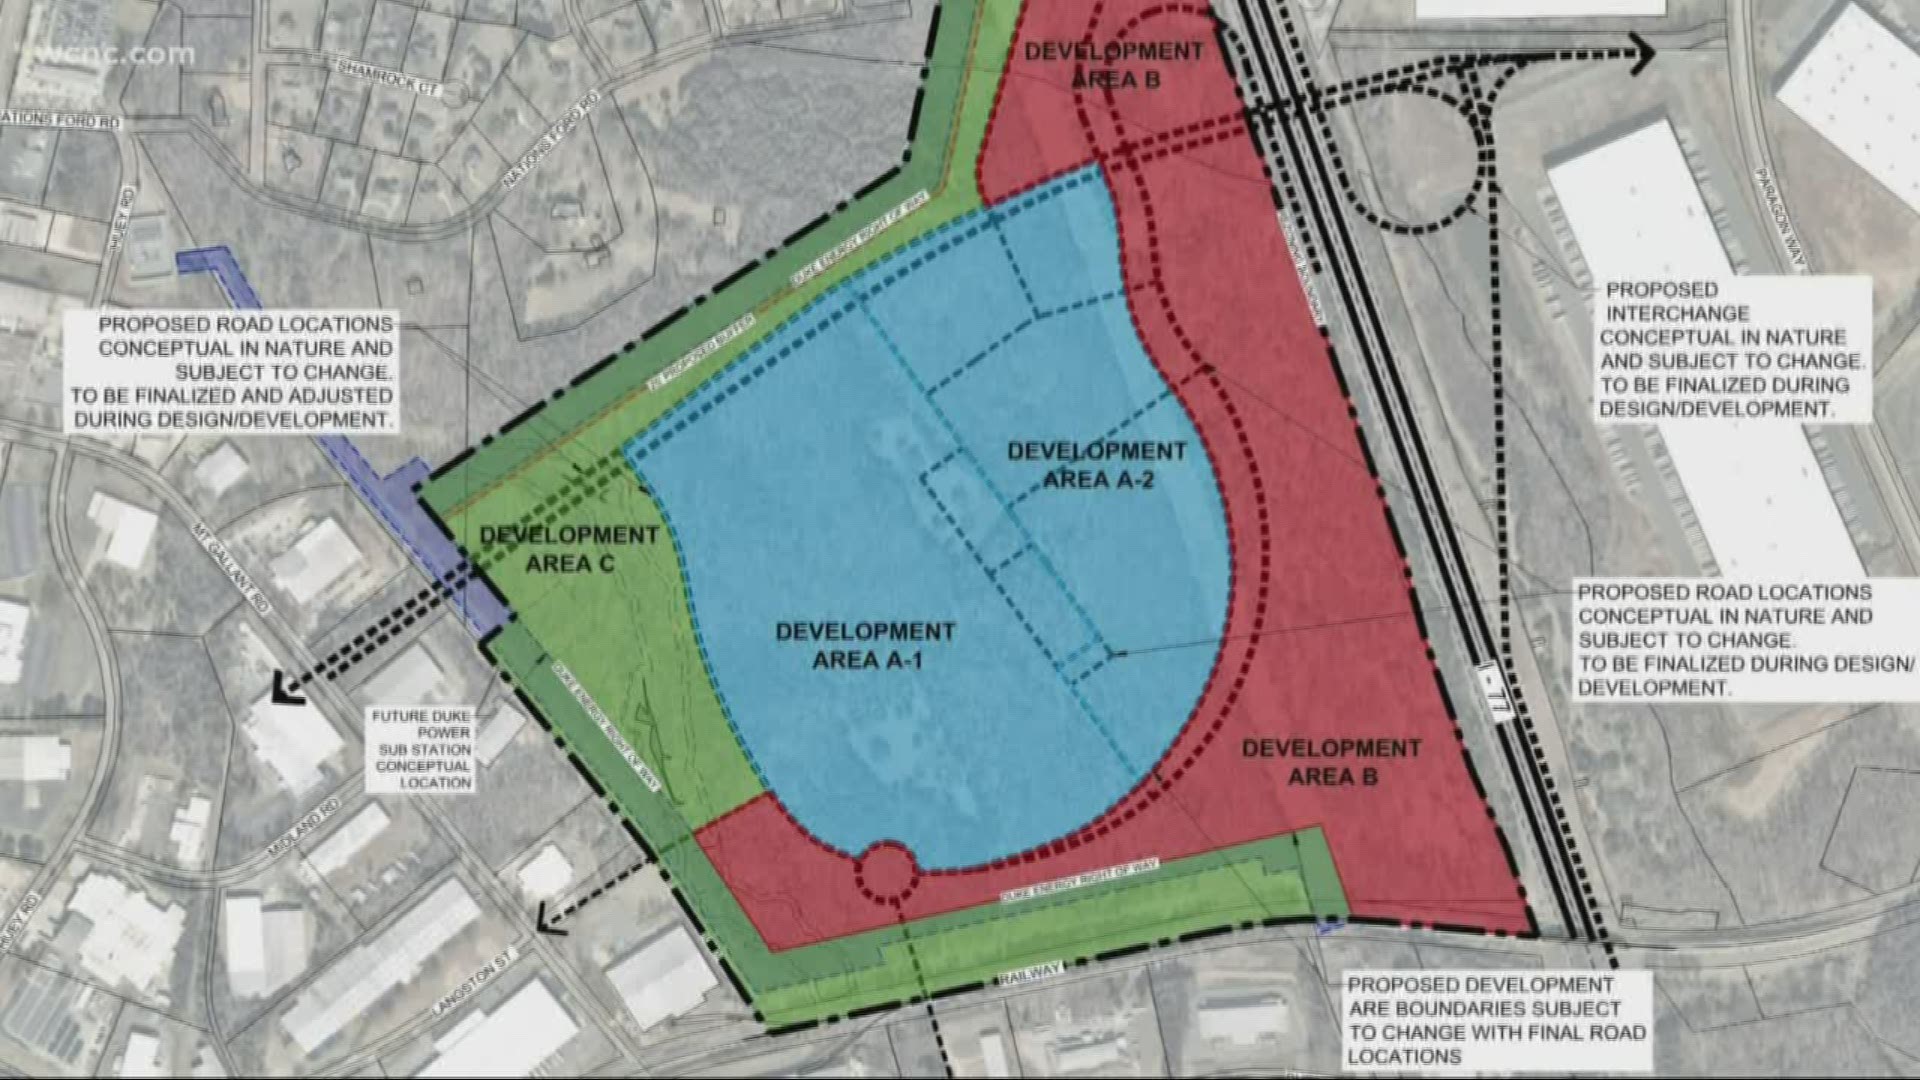 Rock Hill's planning commission recommended the Panthers' request for rezoning and annexation as they look to build a new headquarters in York County.